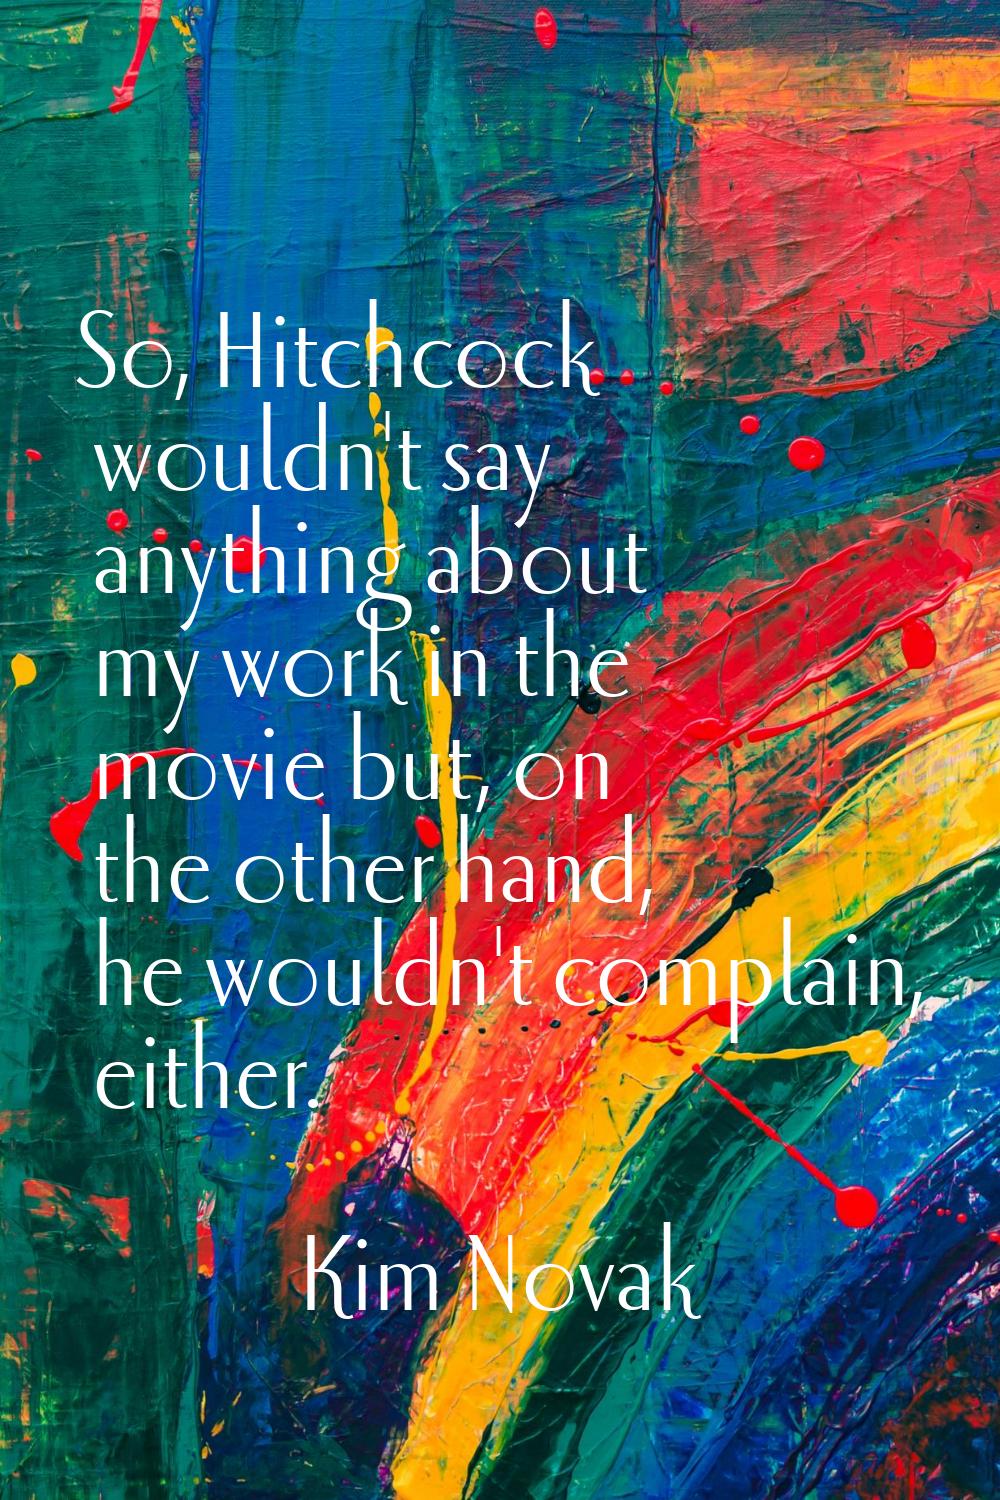 So, Hitchcock wouldn't say anything about my work in the movie but, on the other hand, he wouldn't 